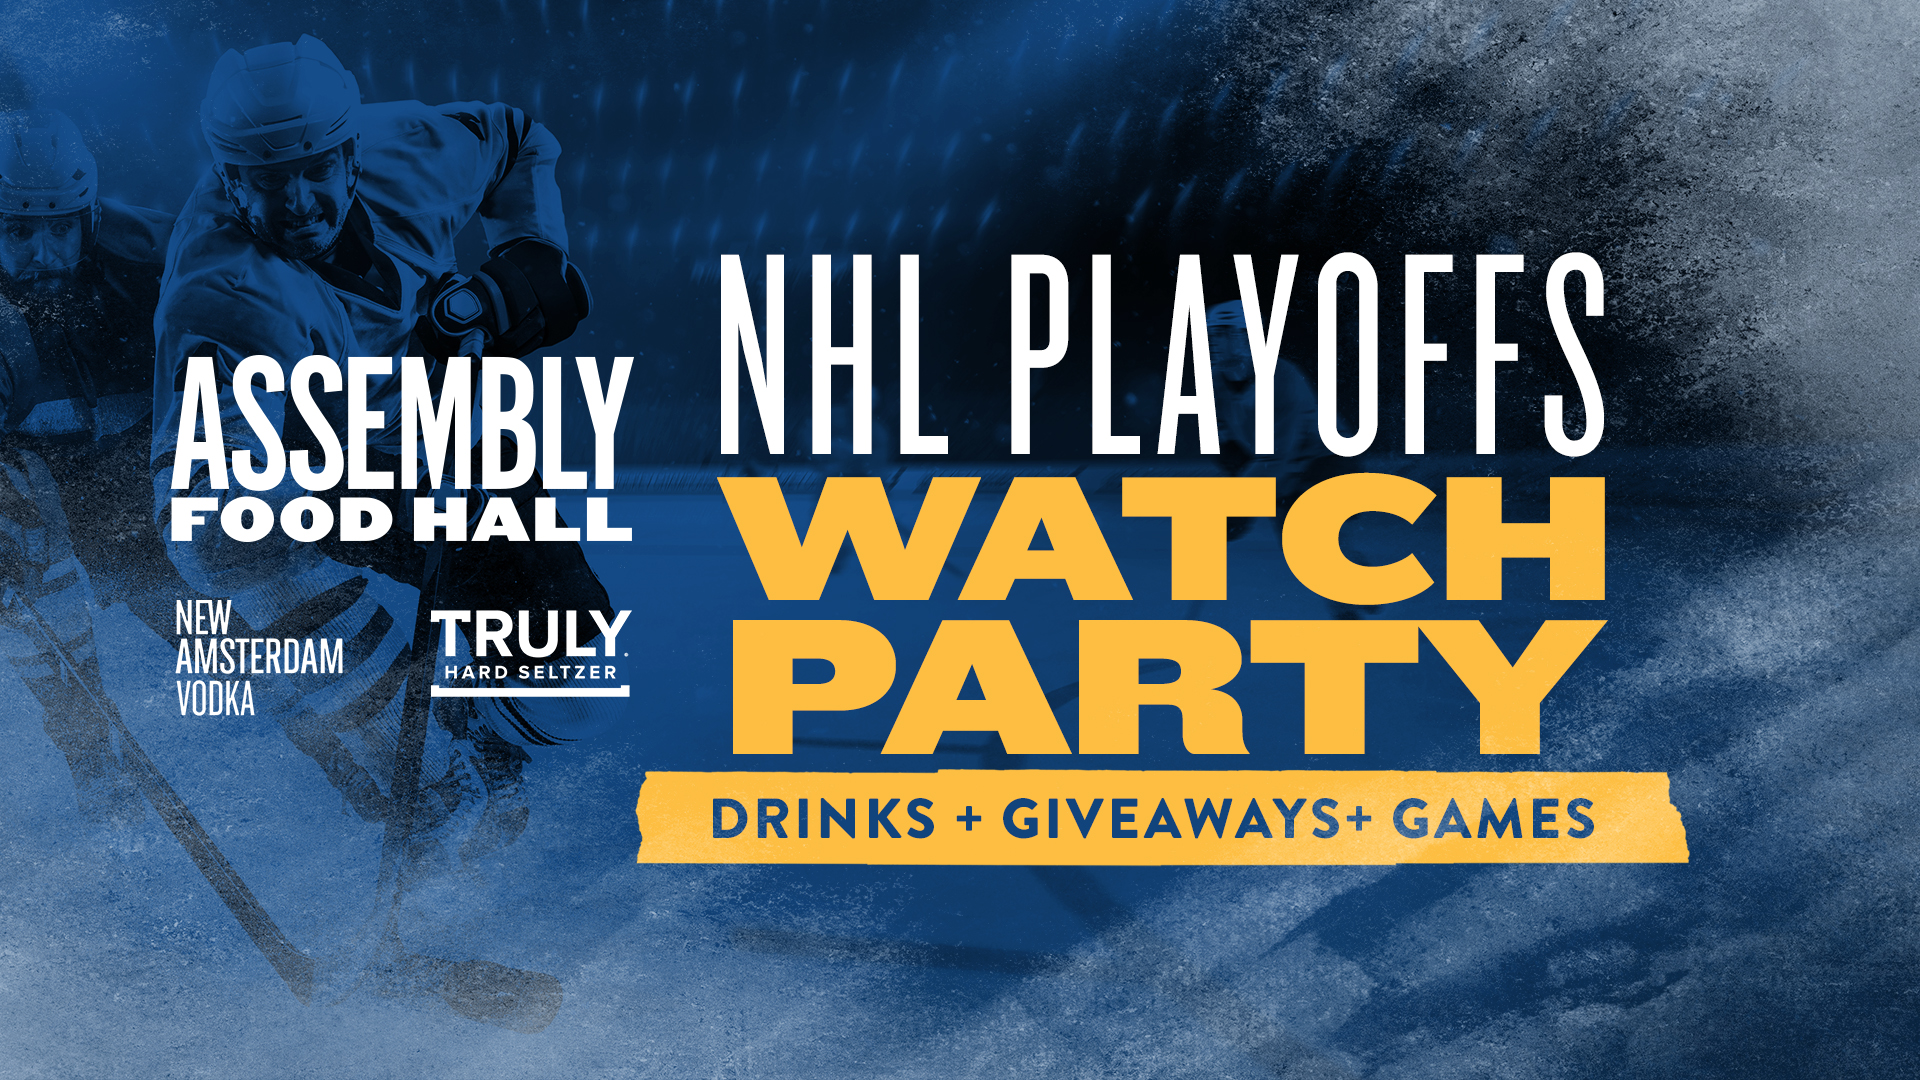 NHL Playoffs Watch Party Assembly Food Hall